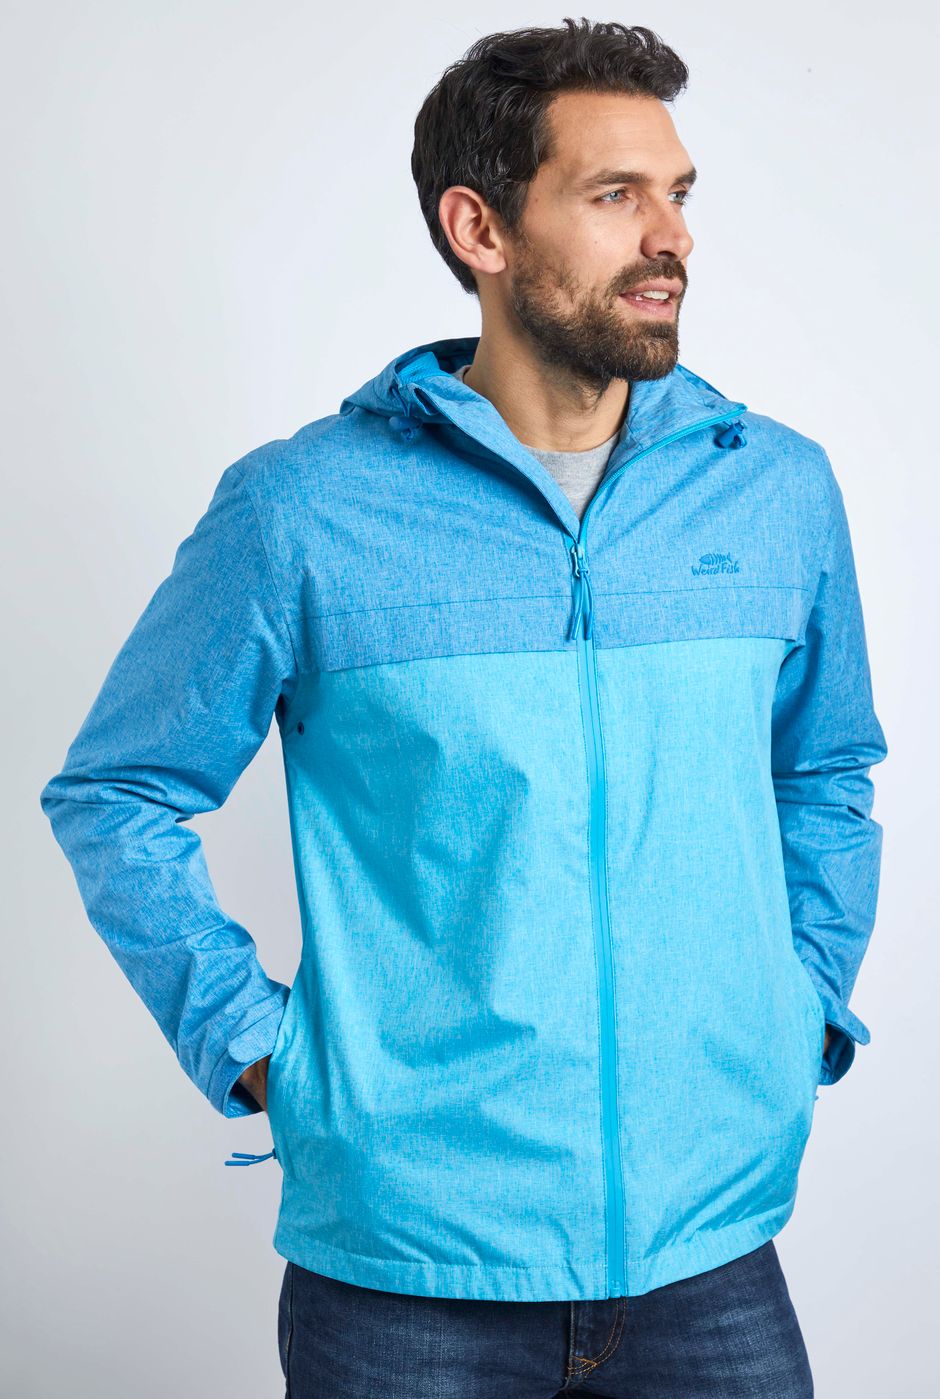 Crandall Recycled Waterproof Jacket Pacific Blue